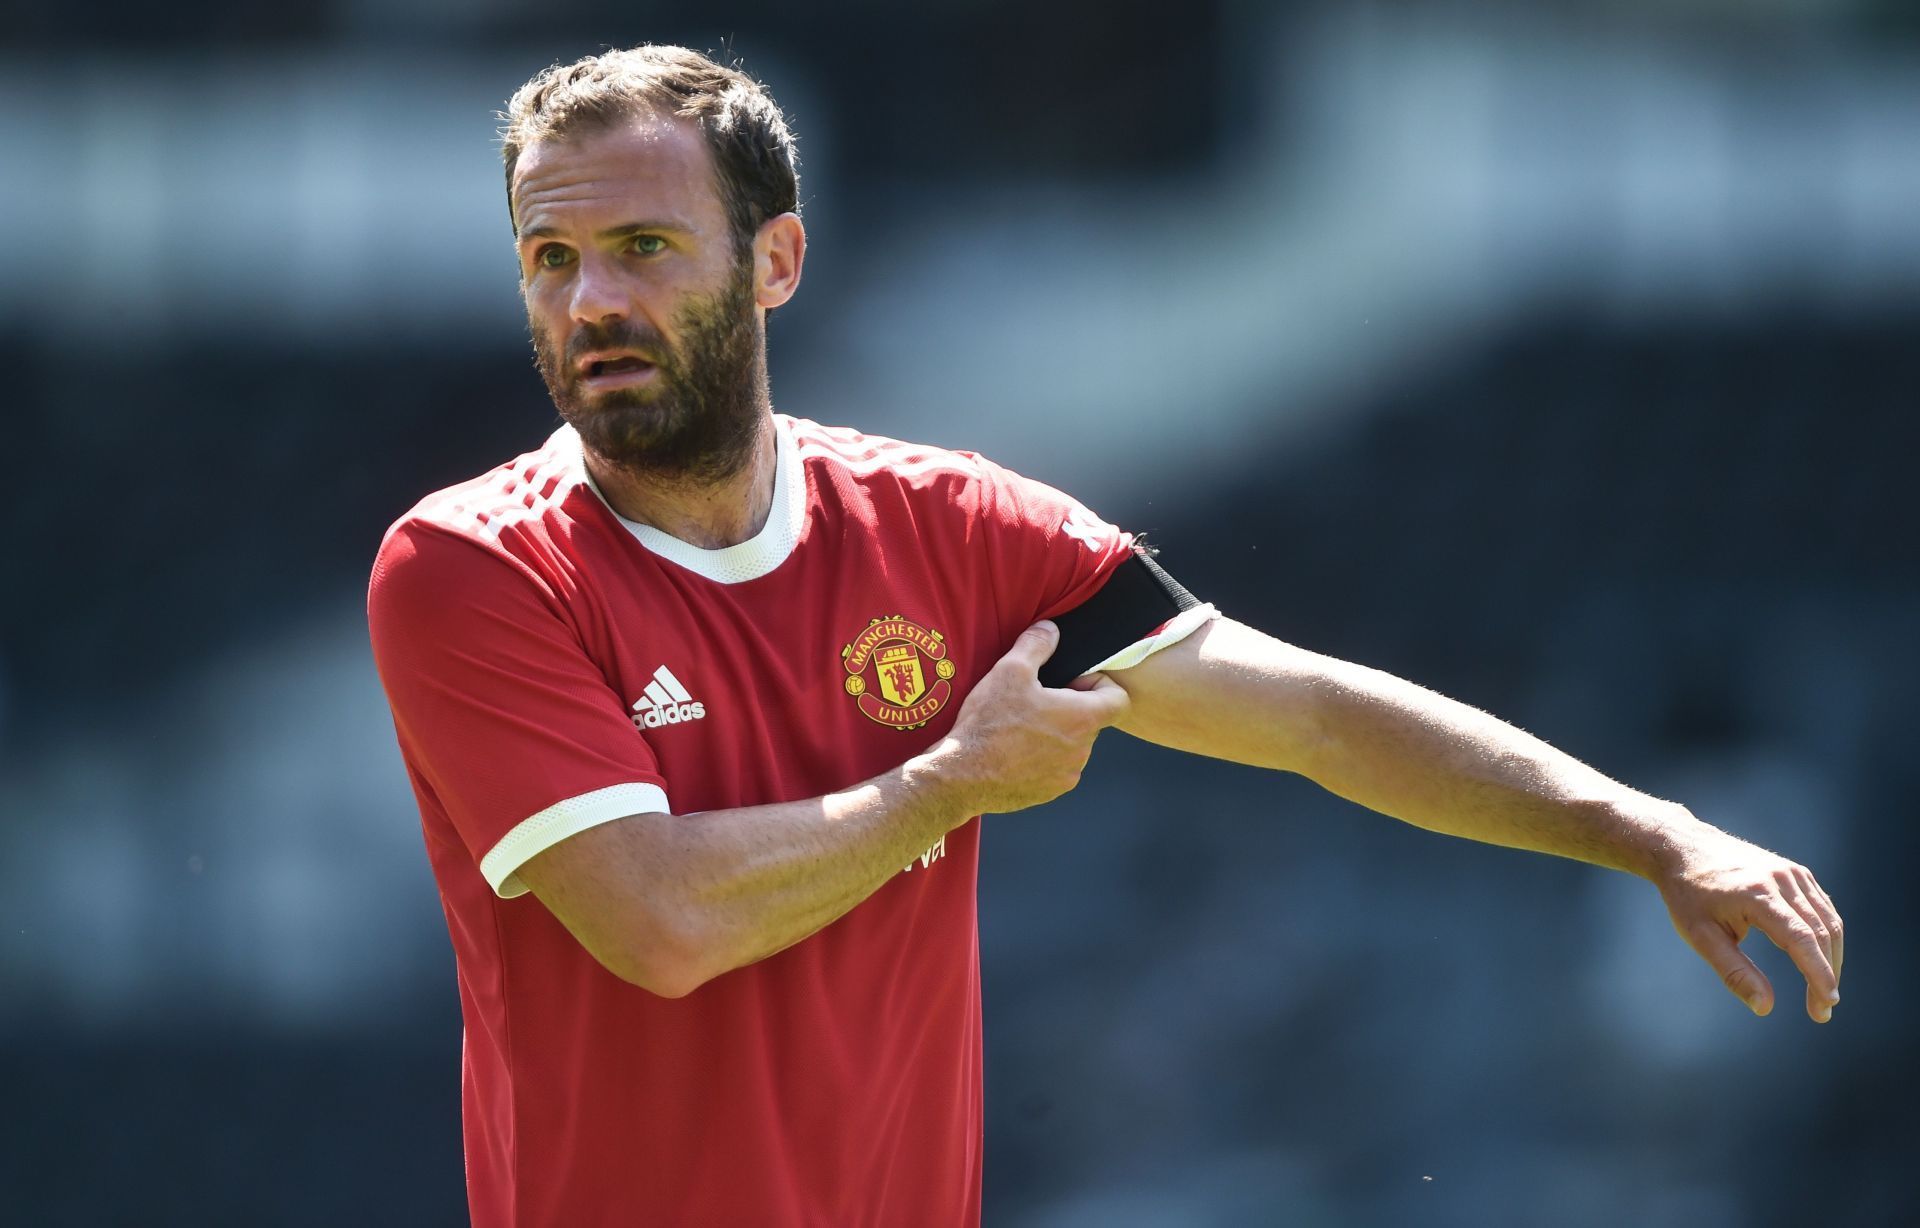 Valencia are plotting a reunion with their former player Juan Mata next summer.